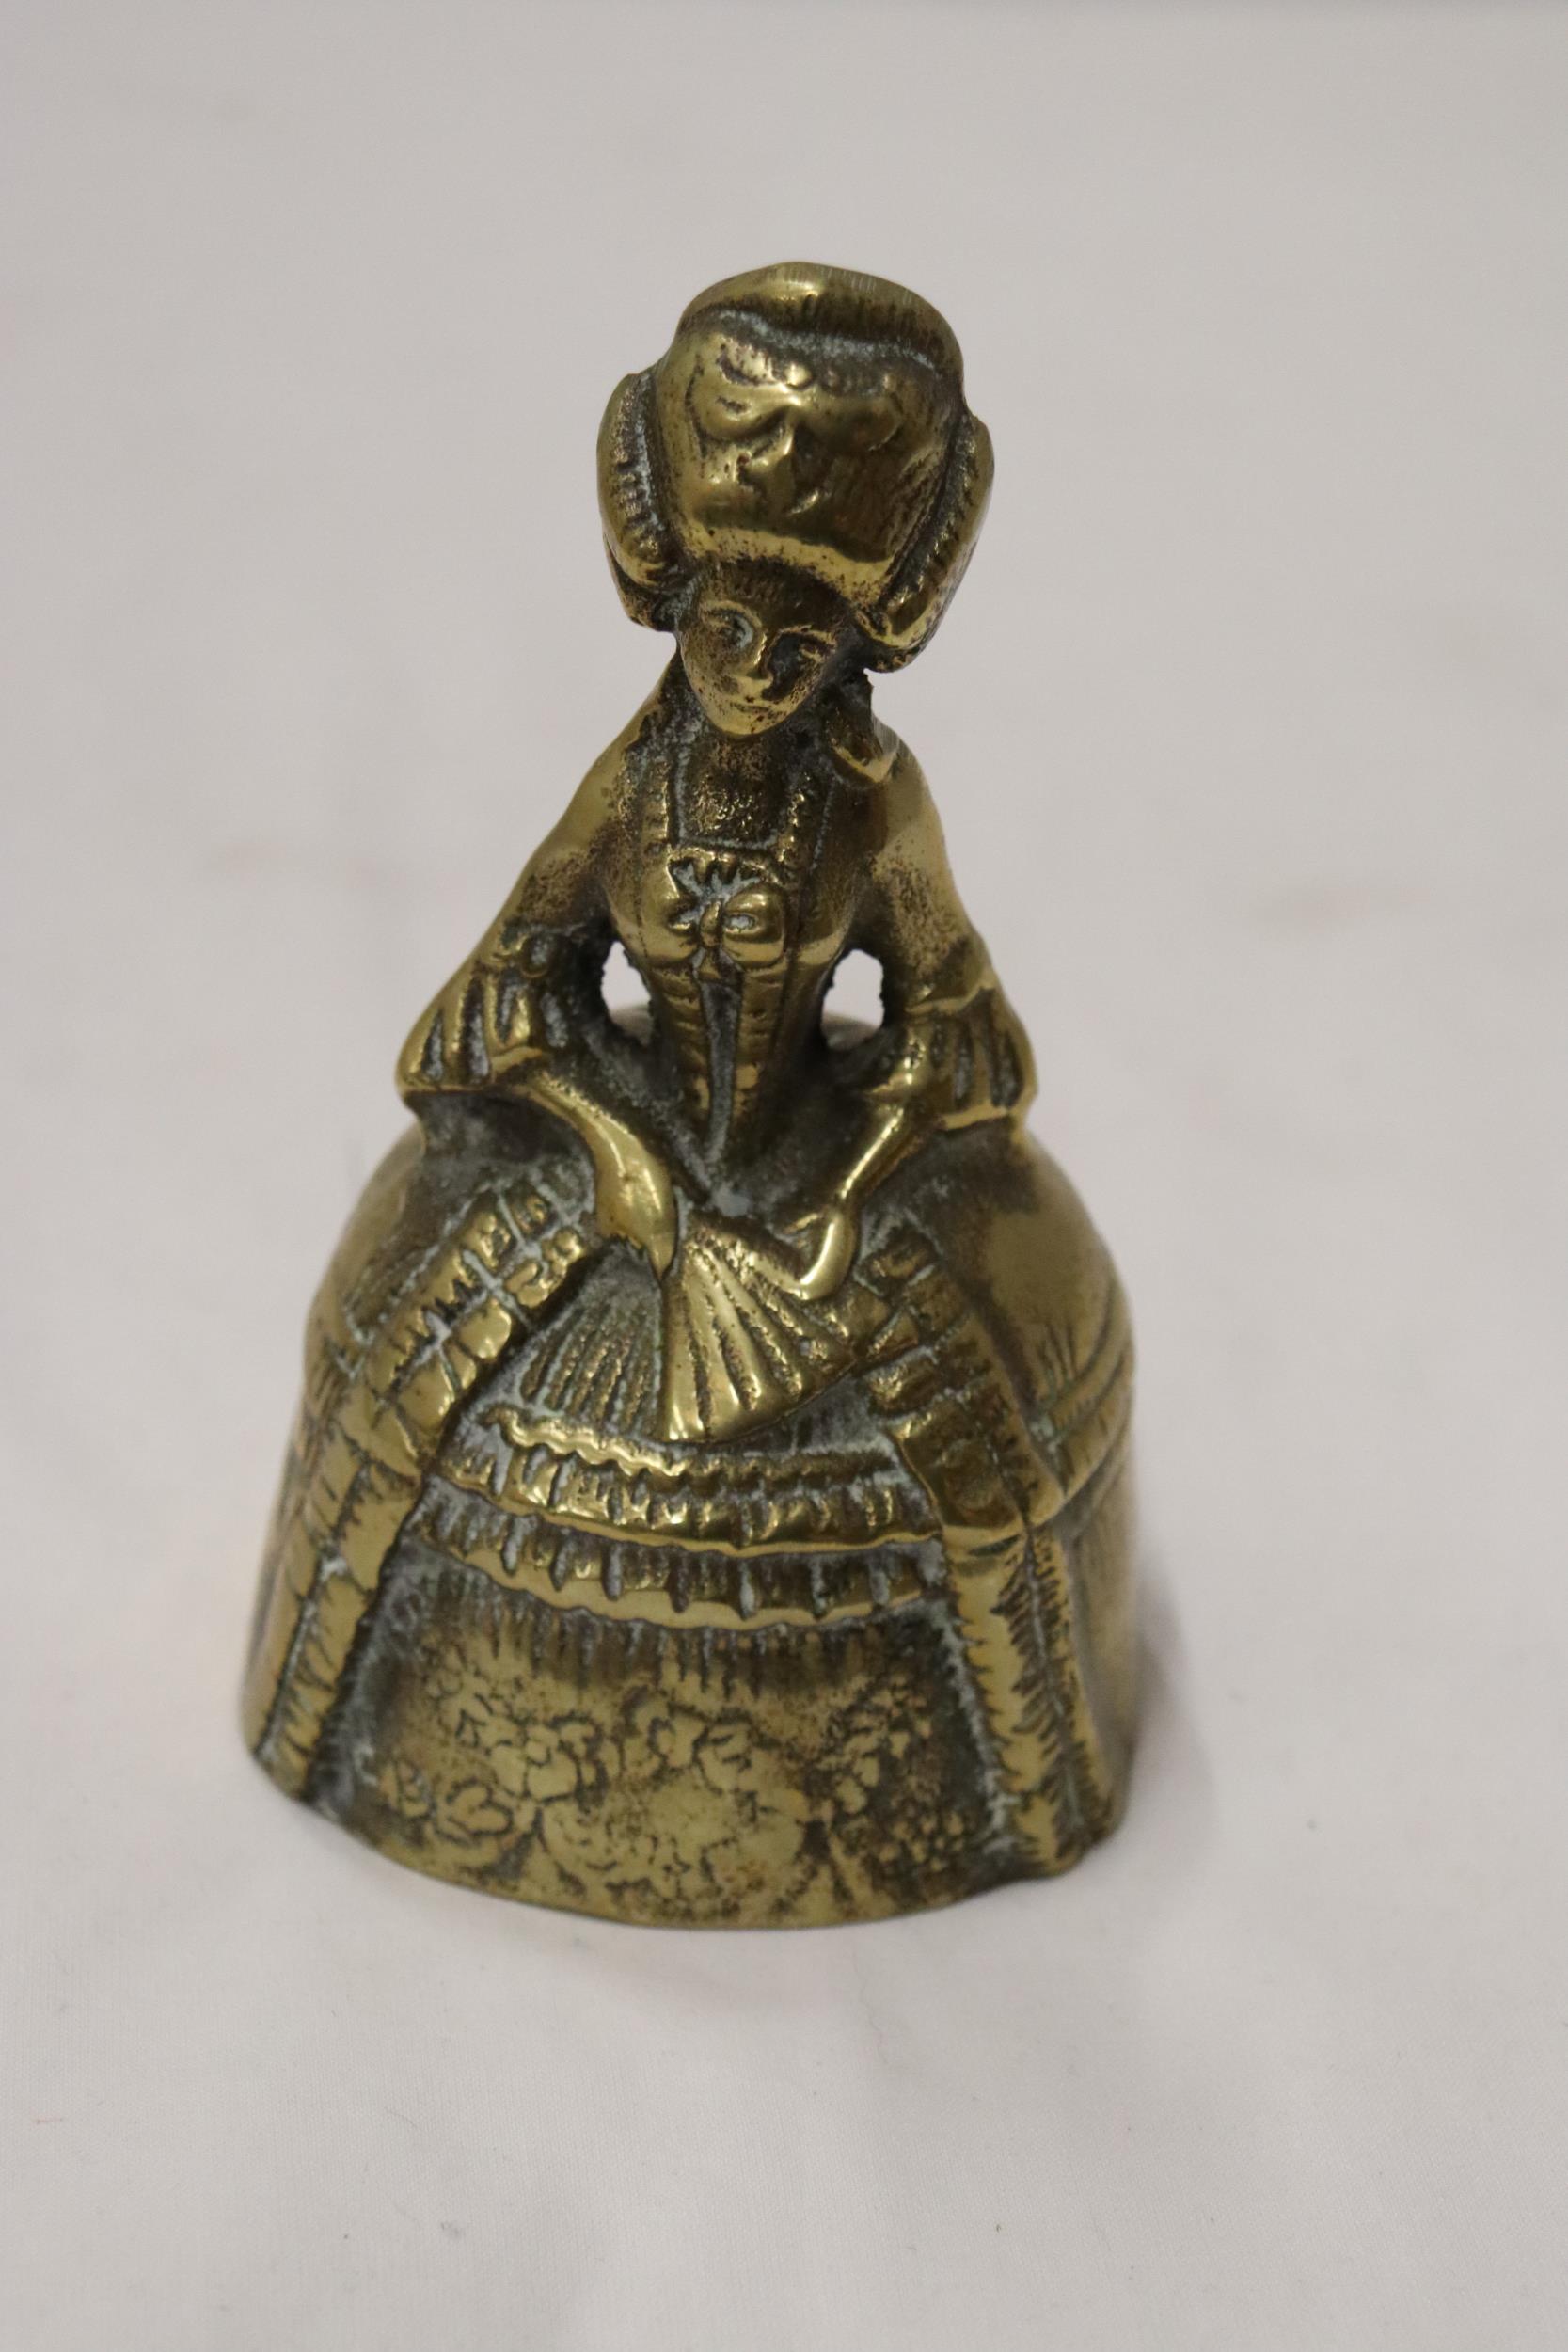 A VINTAGE BRASS BELL MODELLED AS A VICTORIAN WOMAN - Image 2 of 6